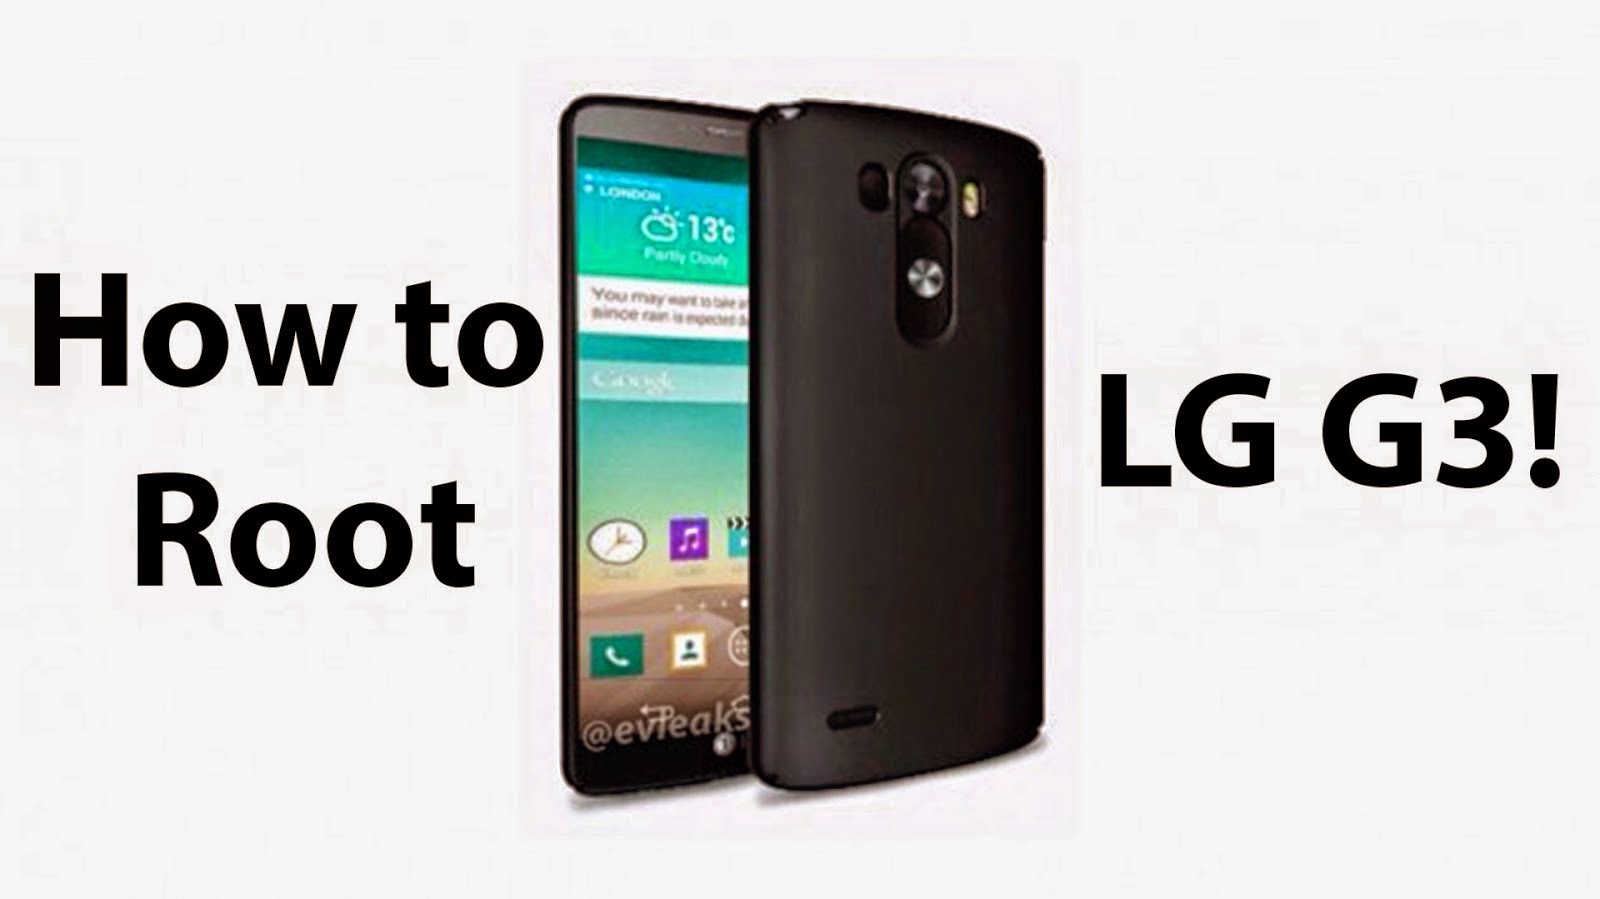 How to root all LG G3 variants on LG Android 5.0 Lollipop firmware